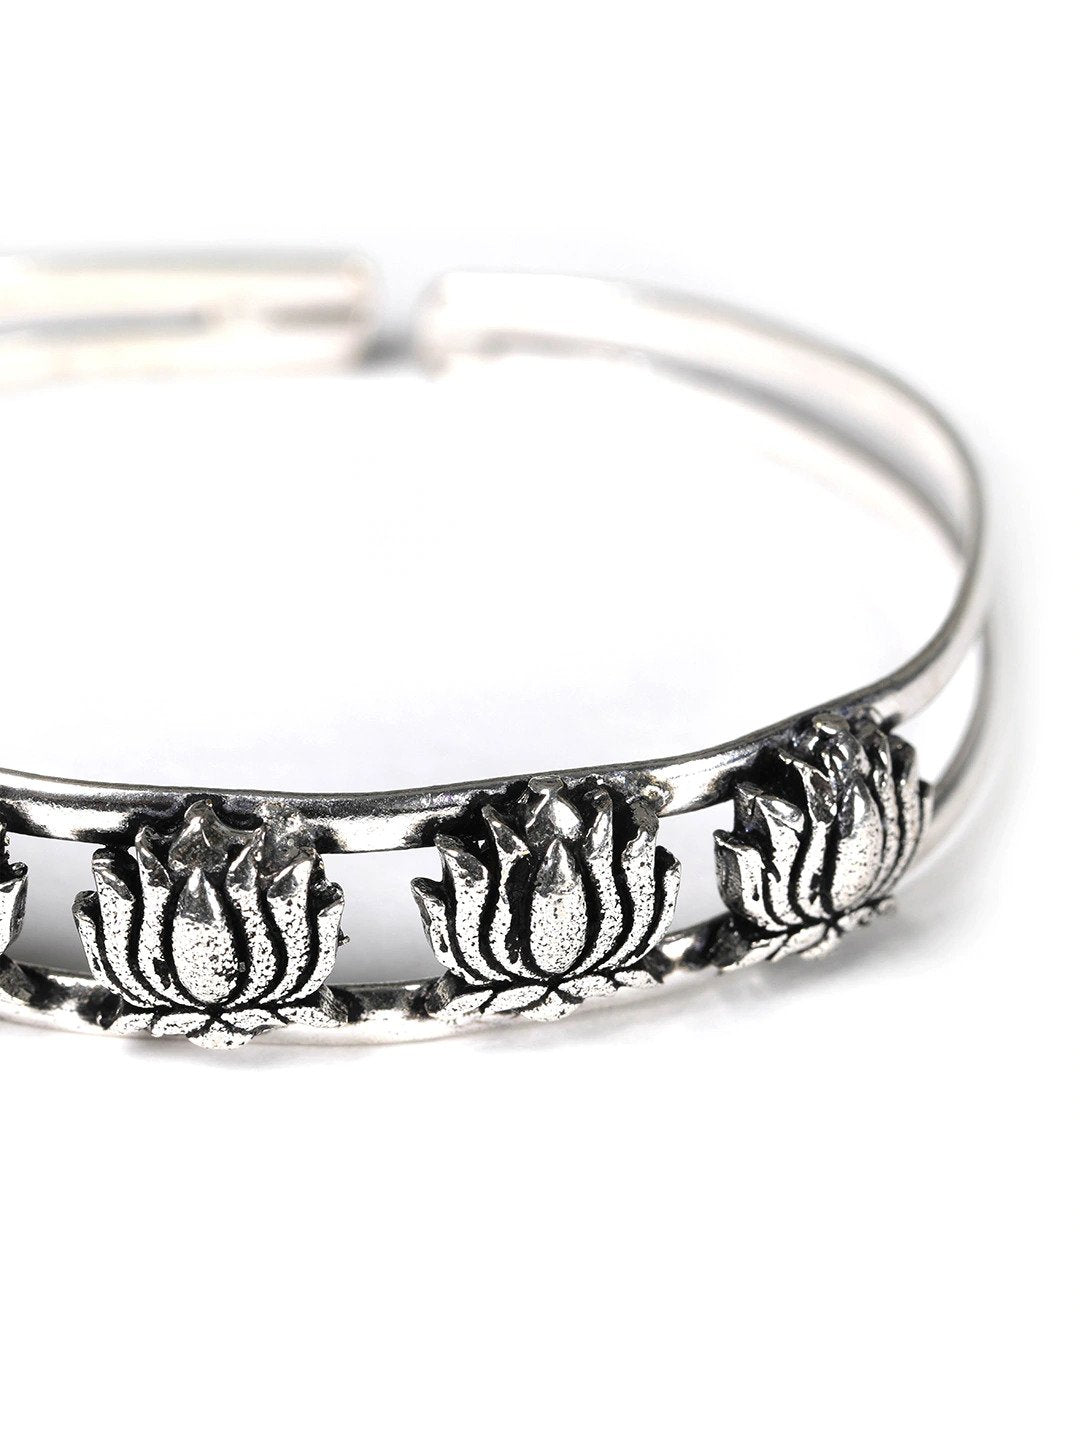 Oxidized Silver-Plated Cuff Bracelet with floral pattern